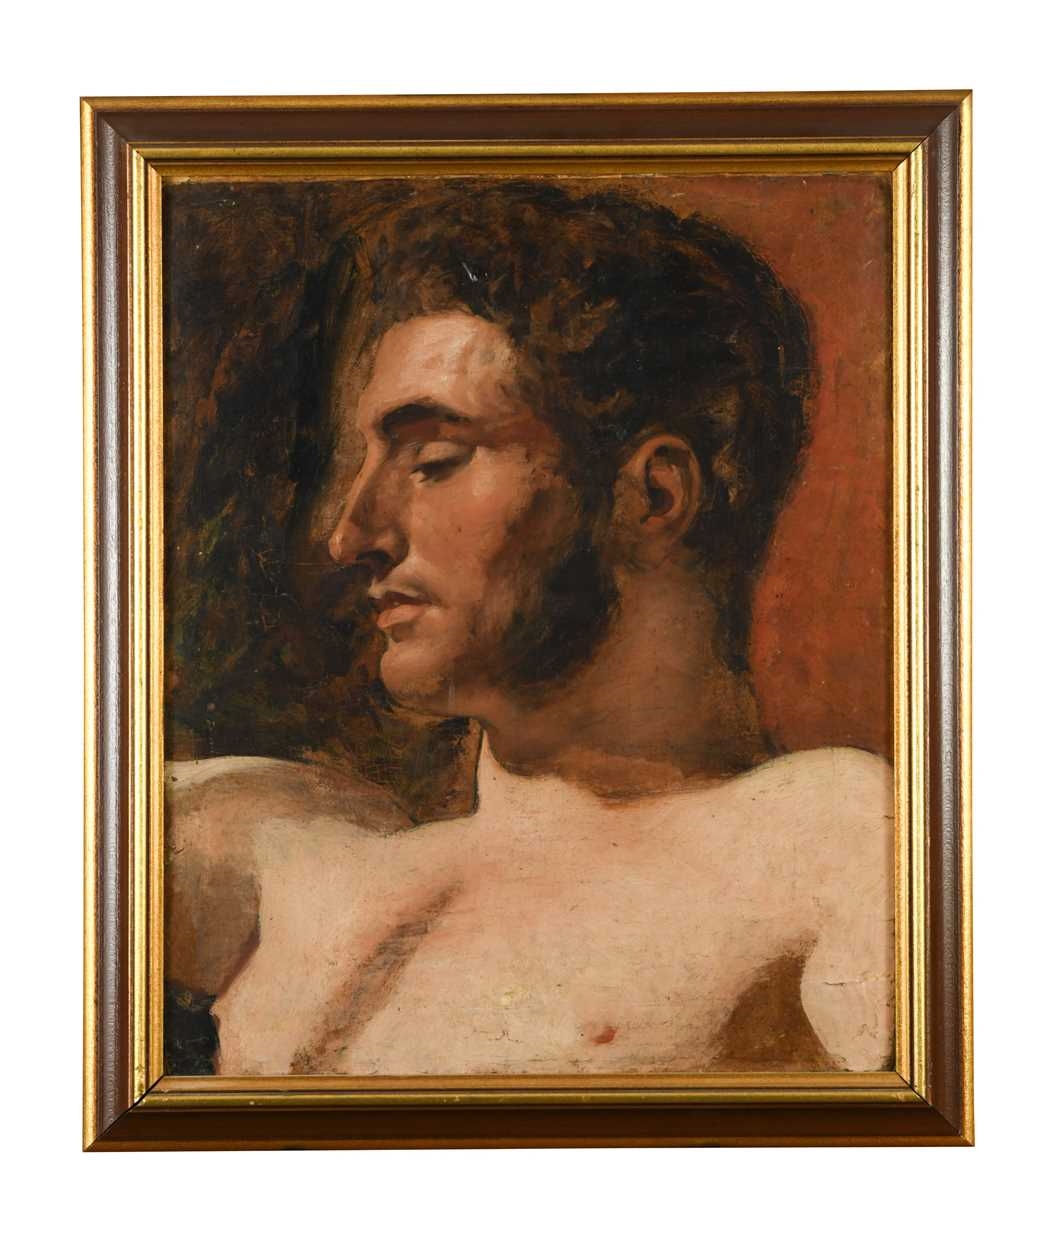 Artwork by William Etty, Study of a male nude, head and shoulders, Made of oil on canvas or paper